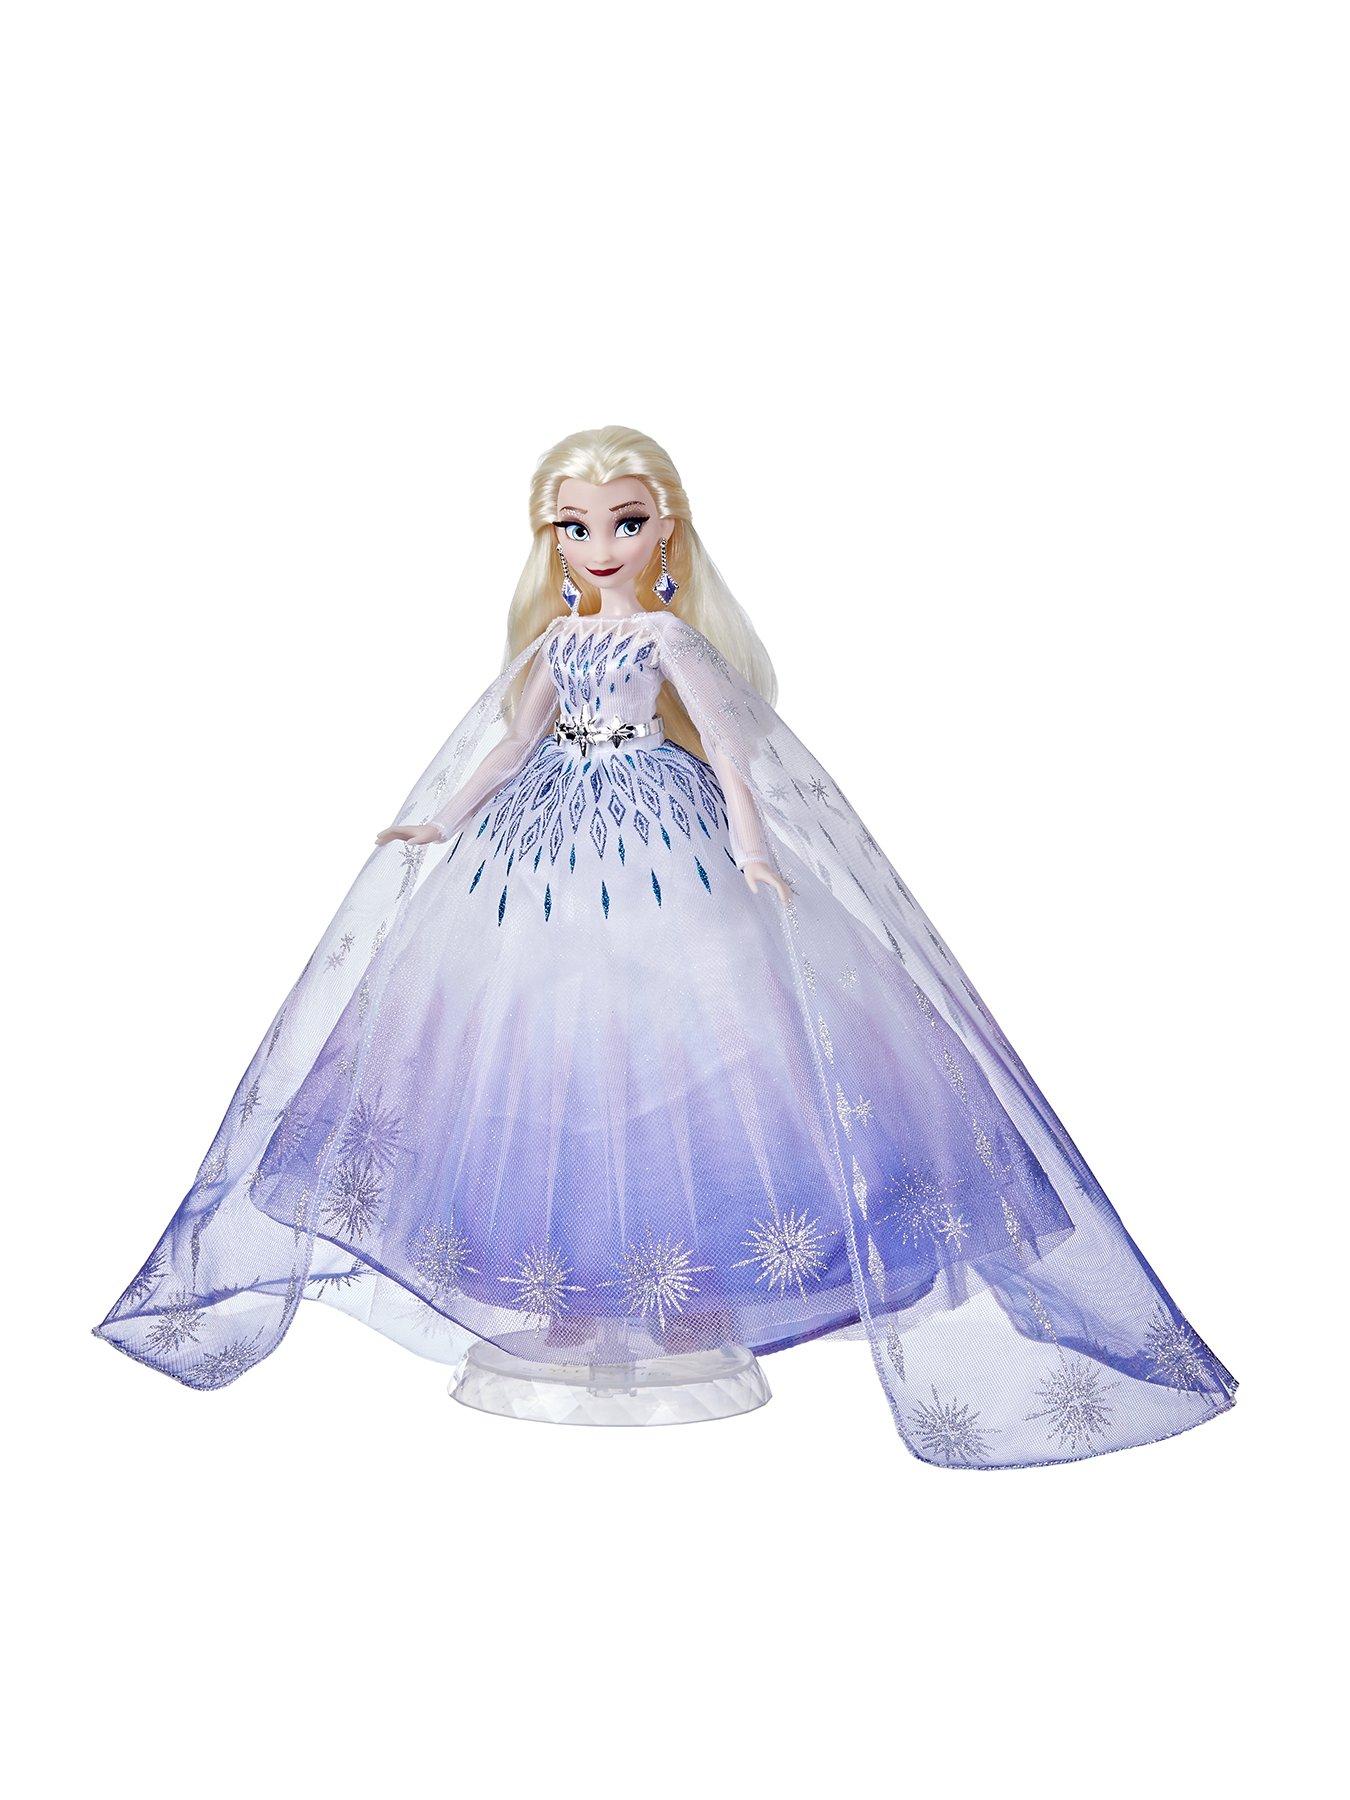 Details about   DRESS MODEL MUSE BARBIE DOLL HOLIDAY WHITE PLASTIC BODICE EVENING GOWN ACCESSORY